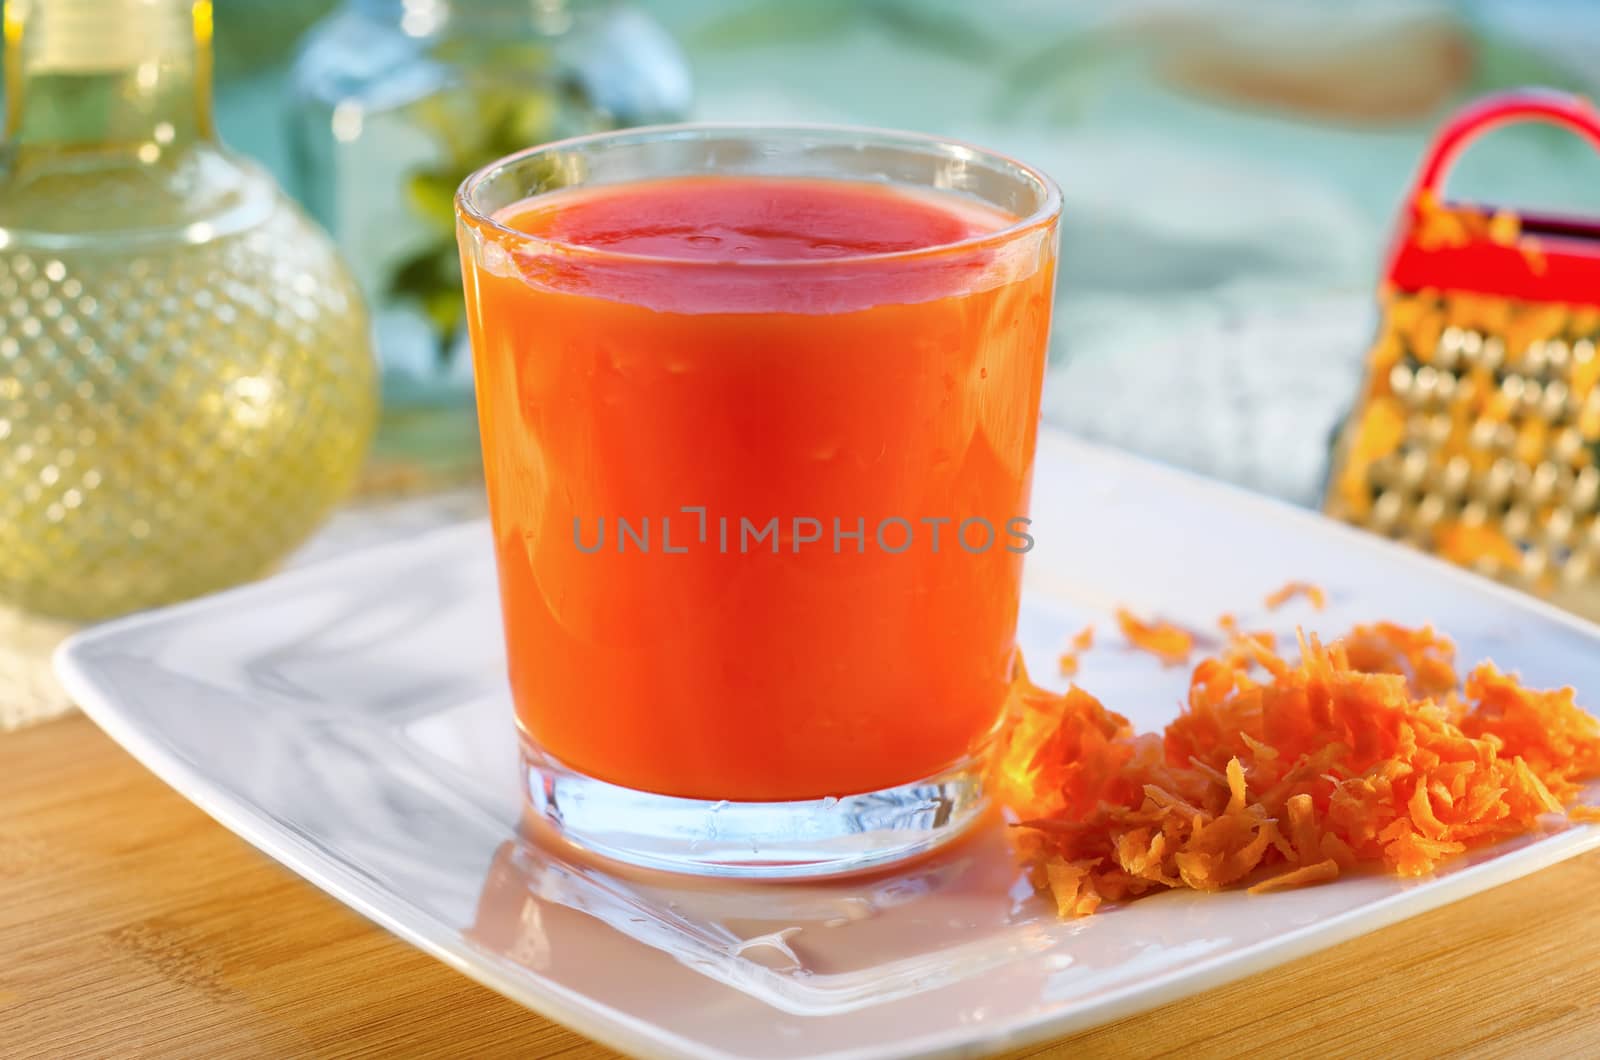 Carrot juice in a glass on a plate, utensils and a bit of grated carrots. Selective focus.